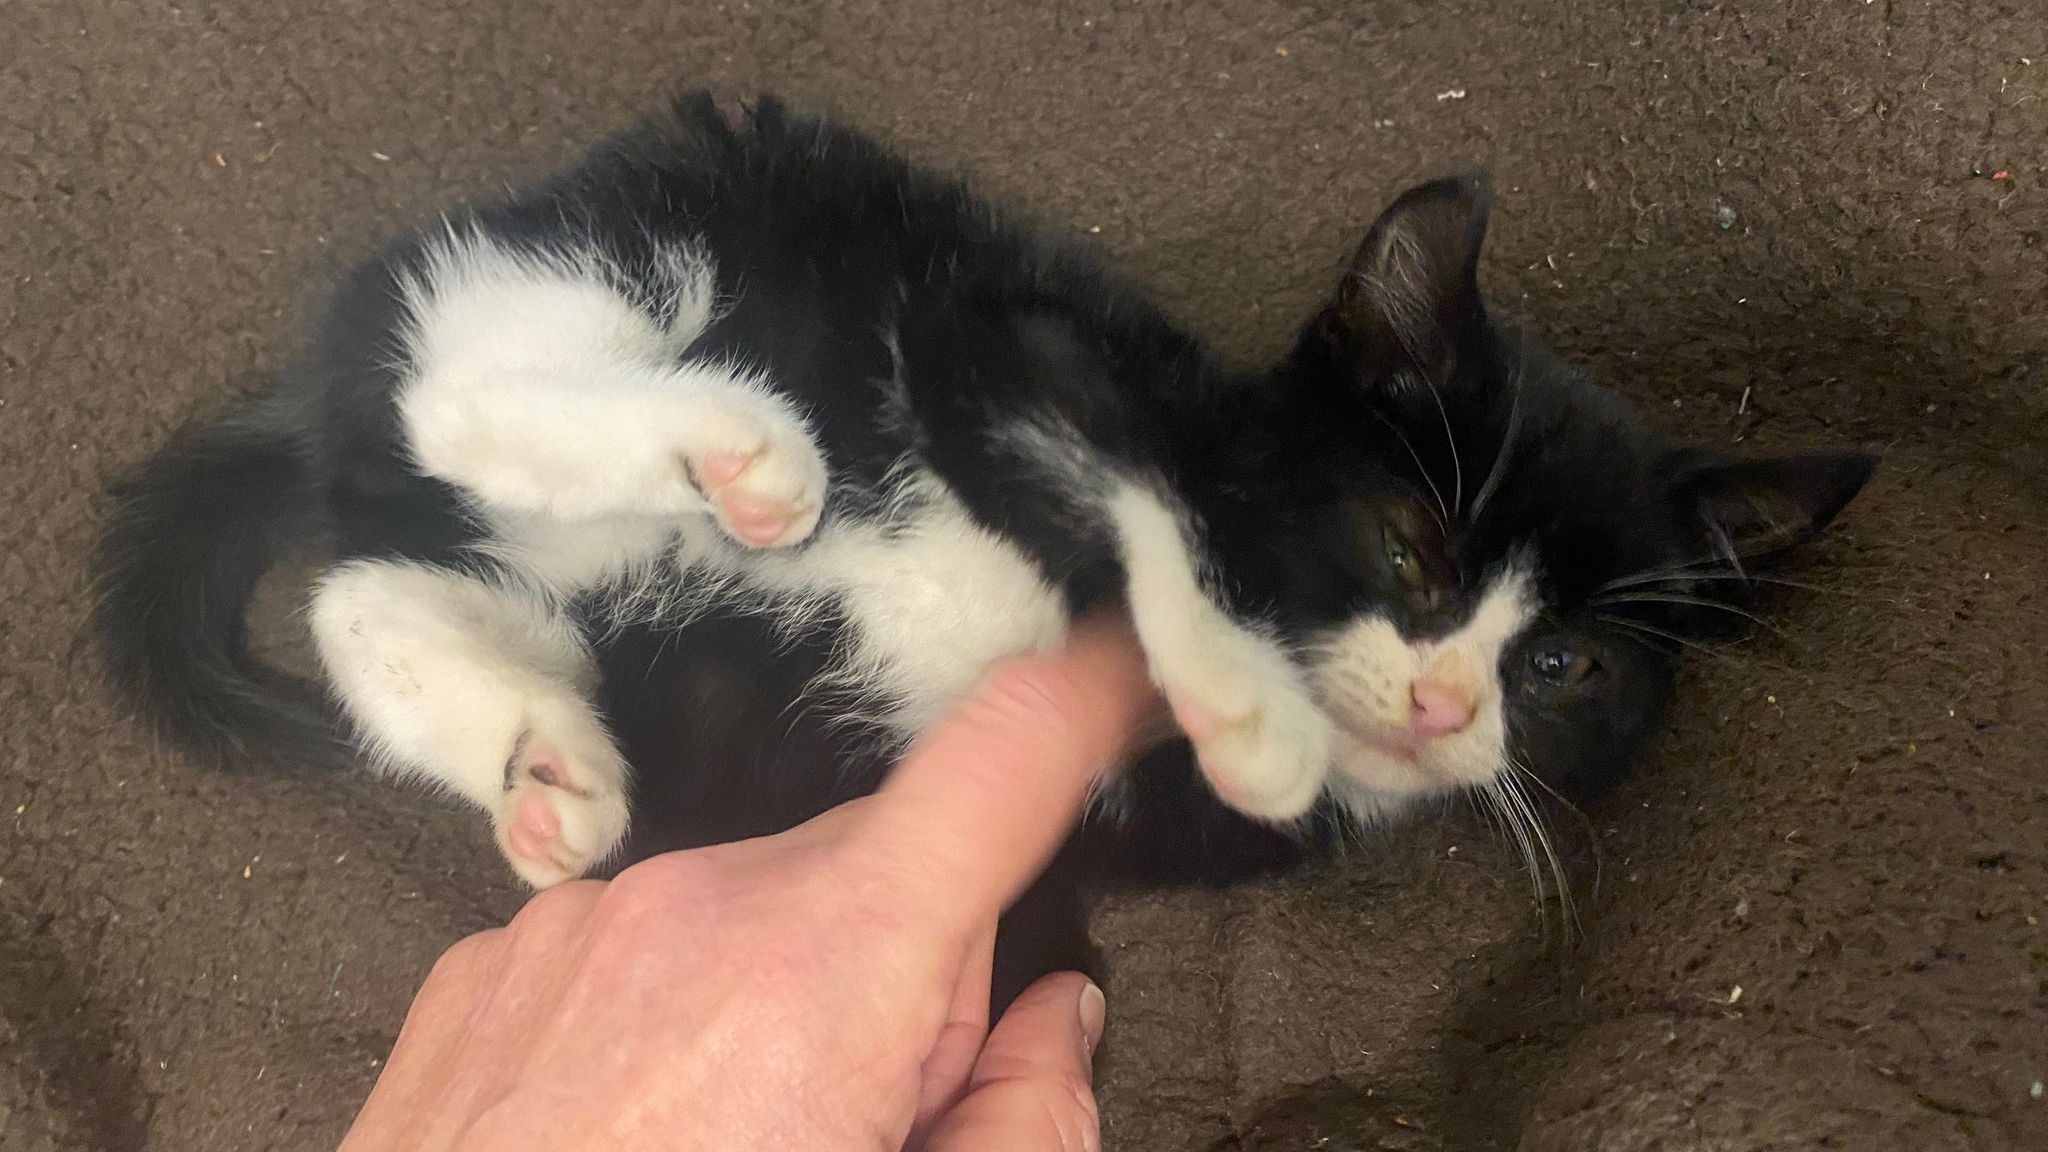 Kitten Survives 250 Mile Journey From Southampton To Merseyside In The Bonnet Of A Lorry Itv 